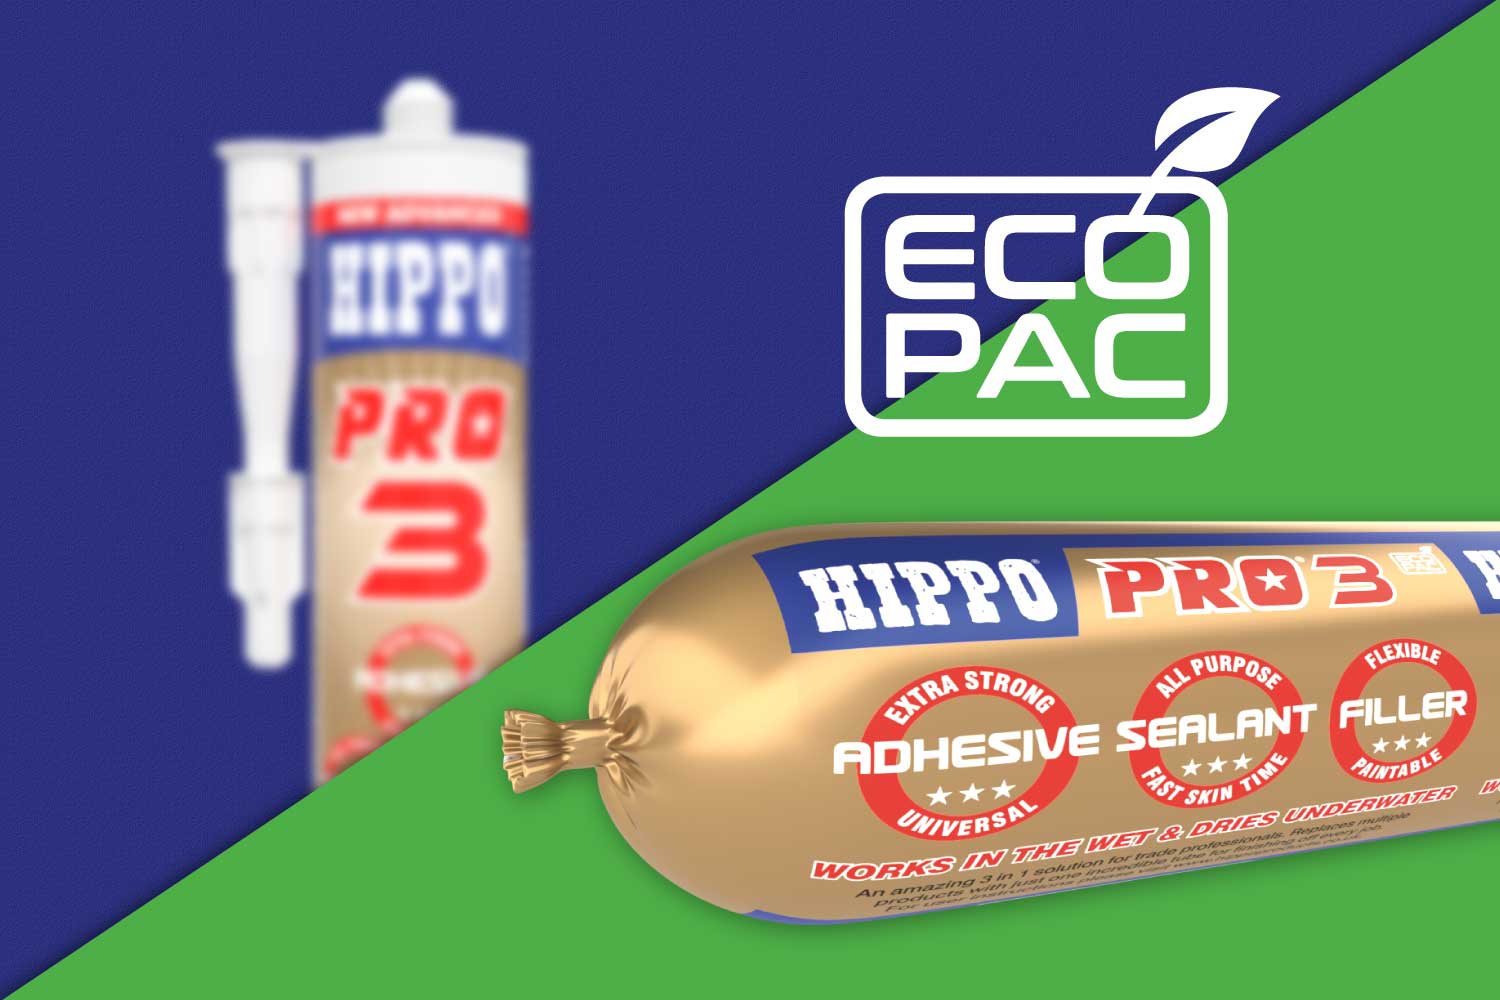 Hippo ECO-PAC Sealant Event to Take Place in Lewes